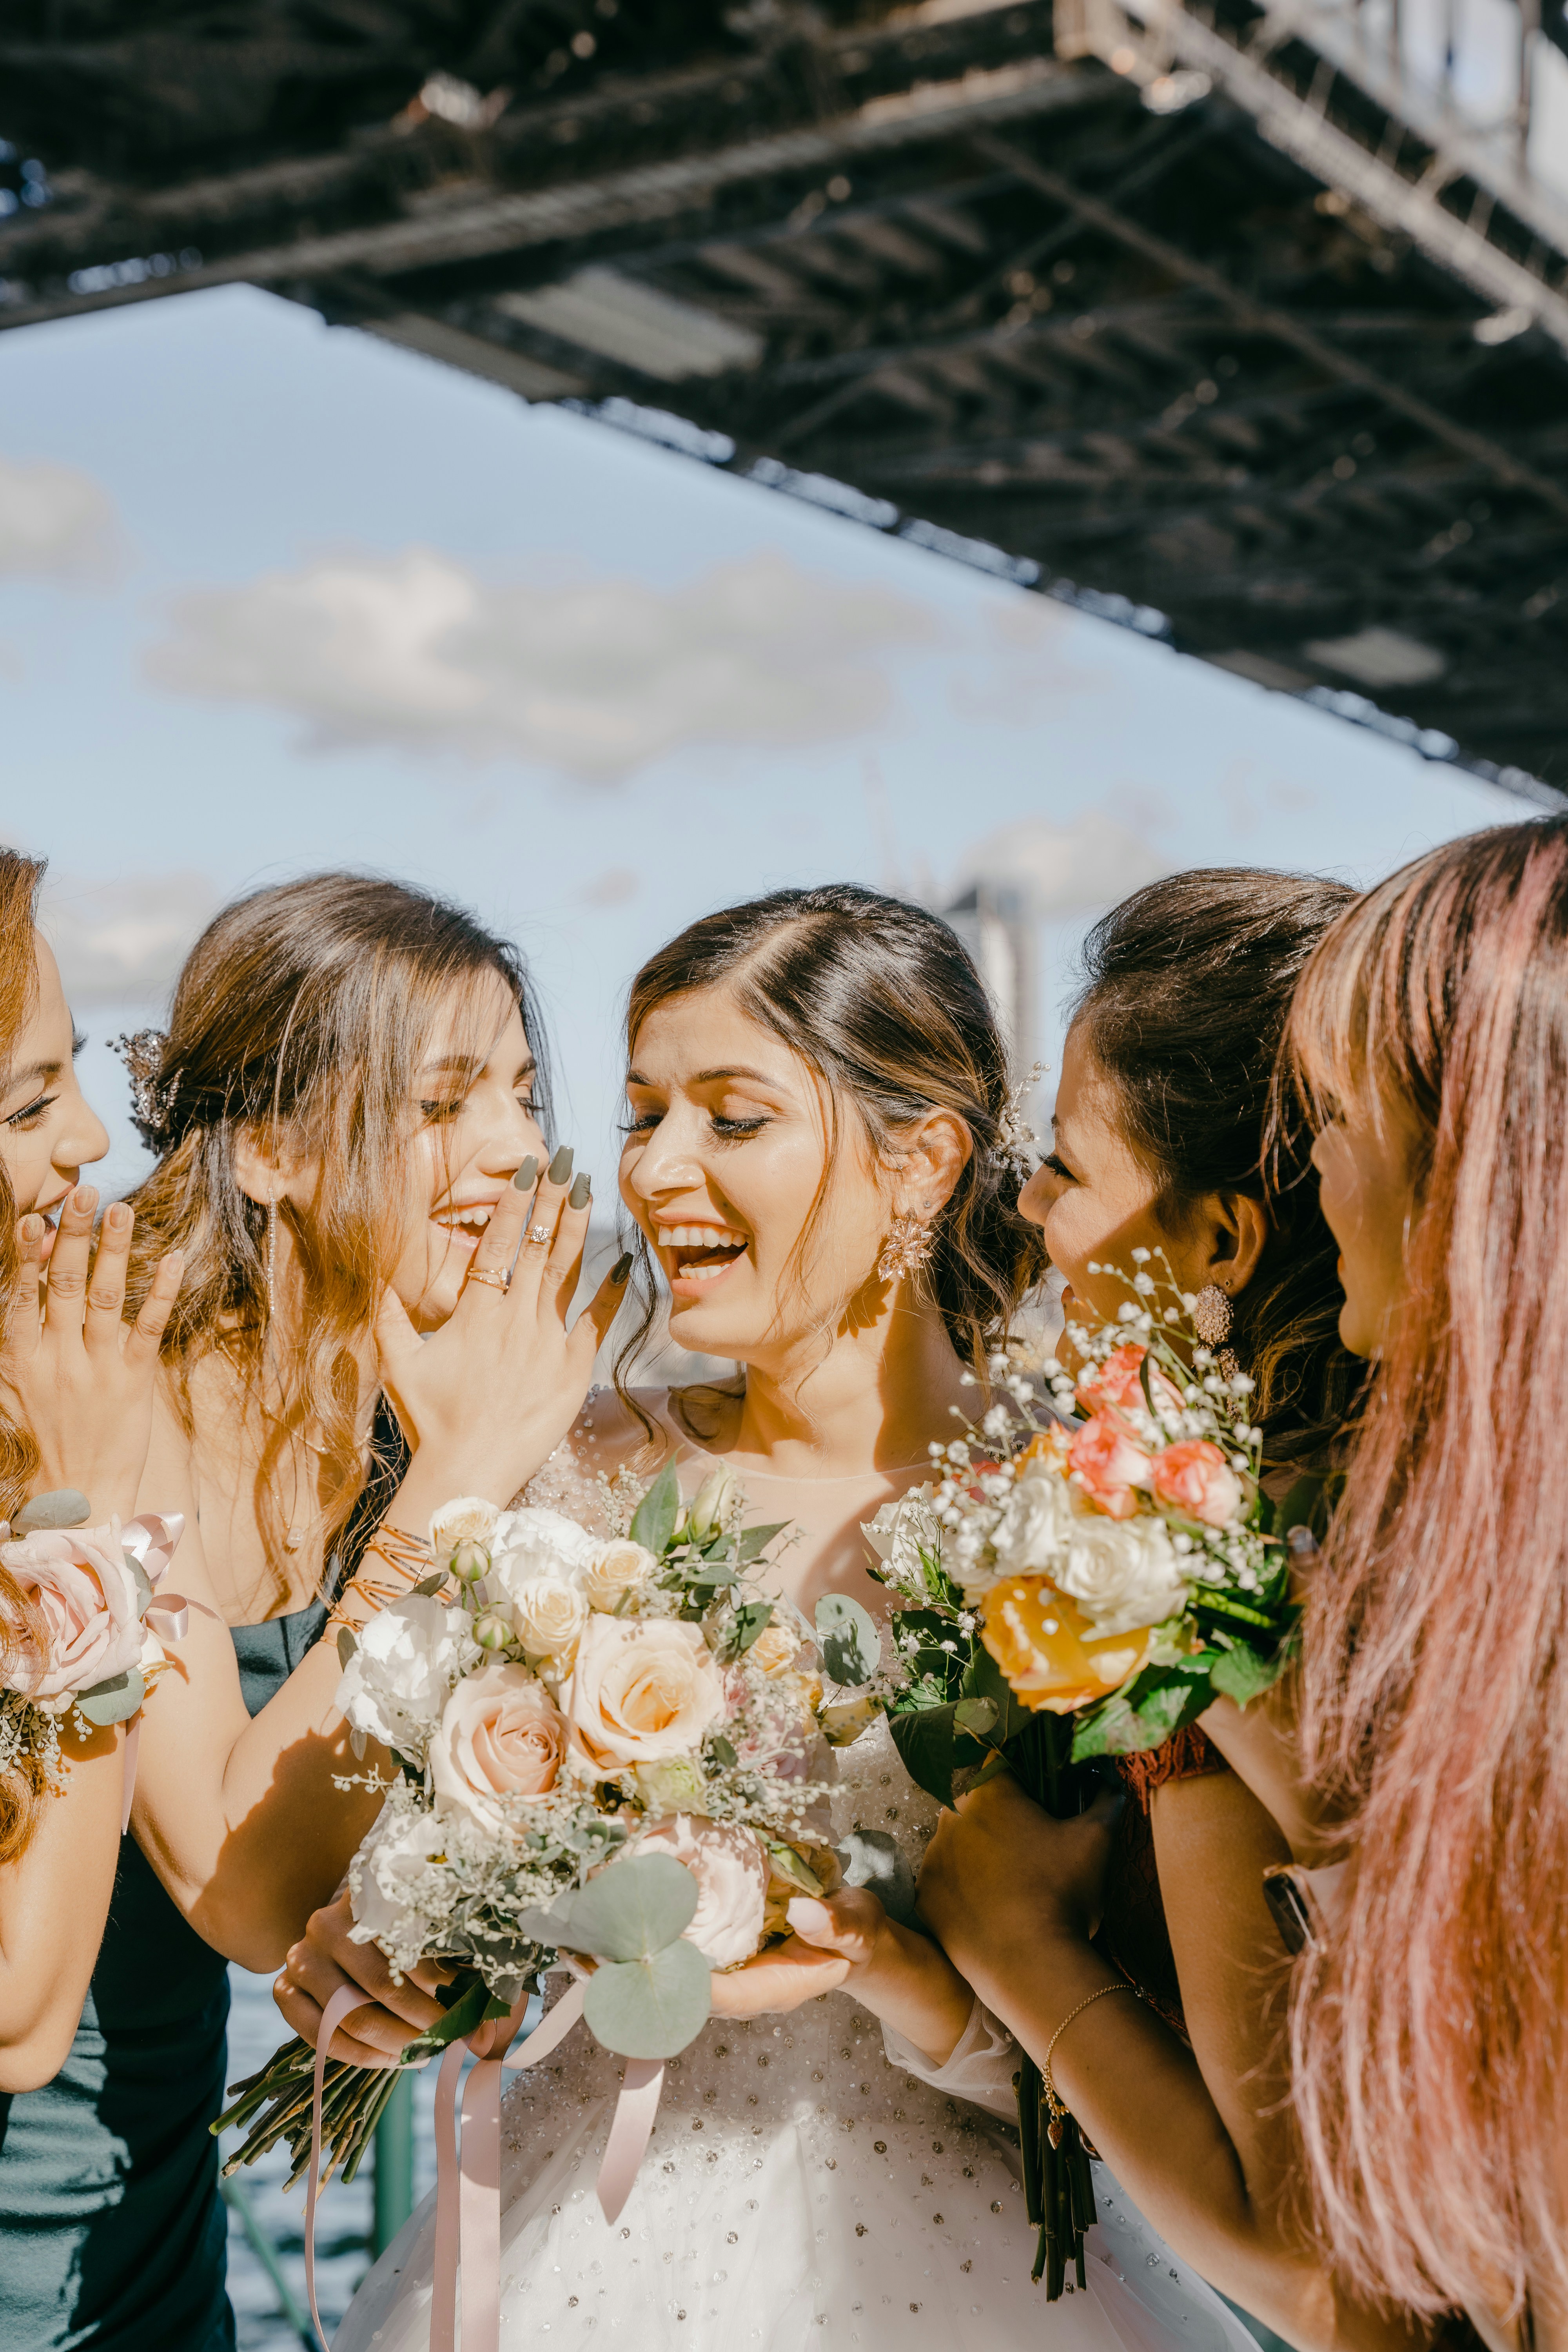 Tips for planning a FUN wedding